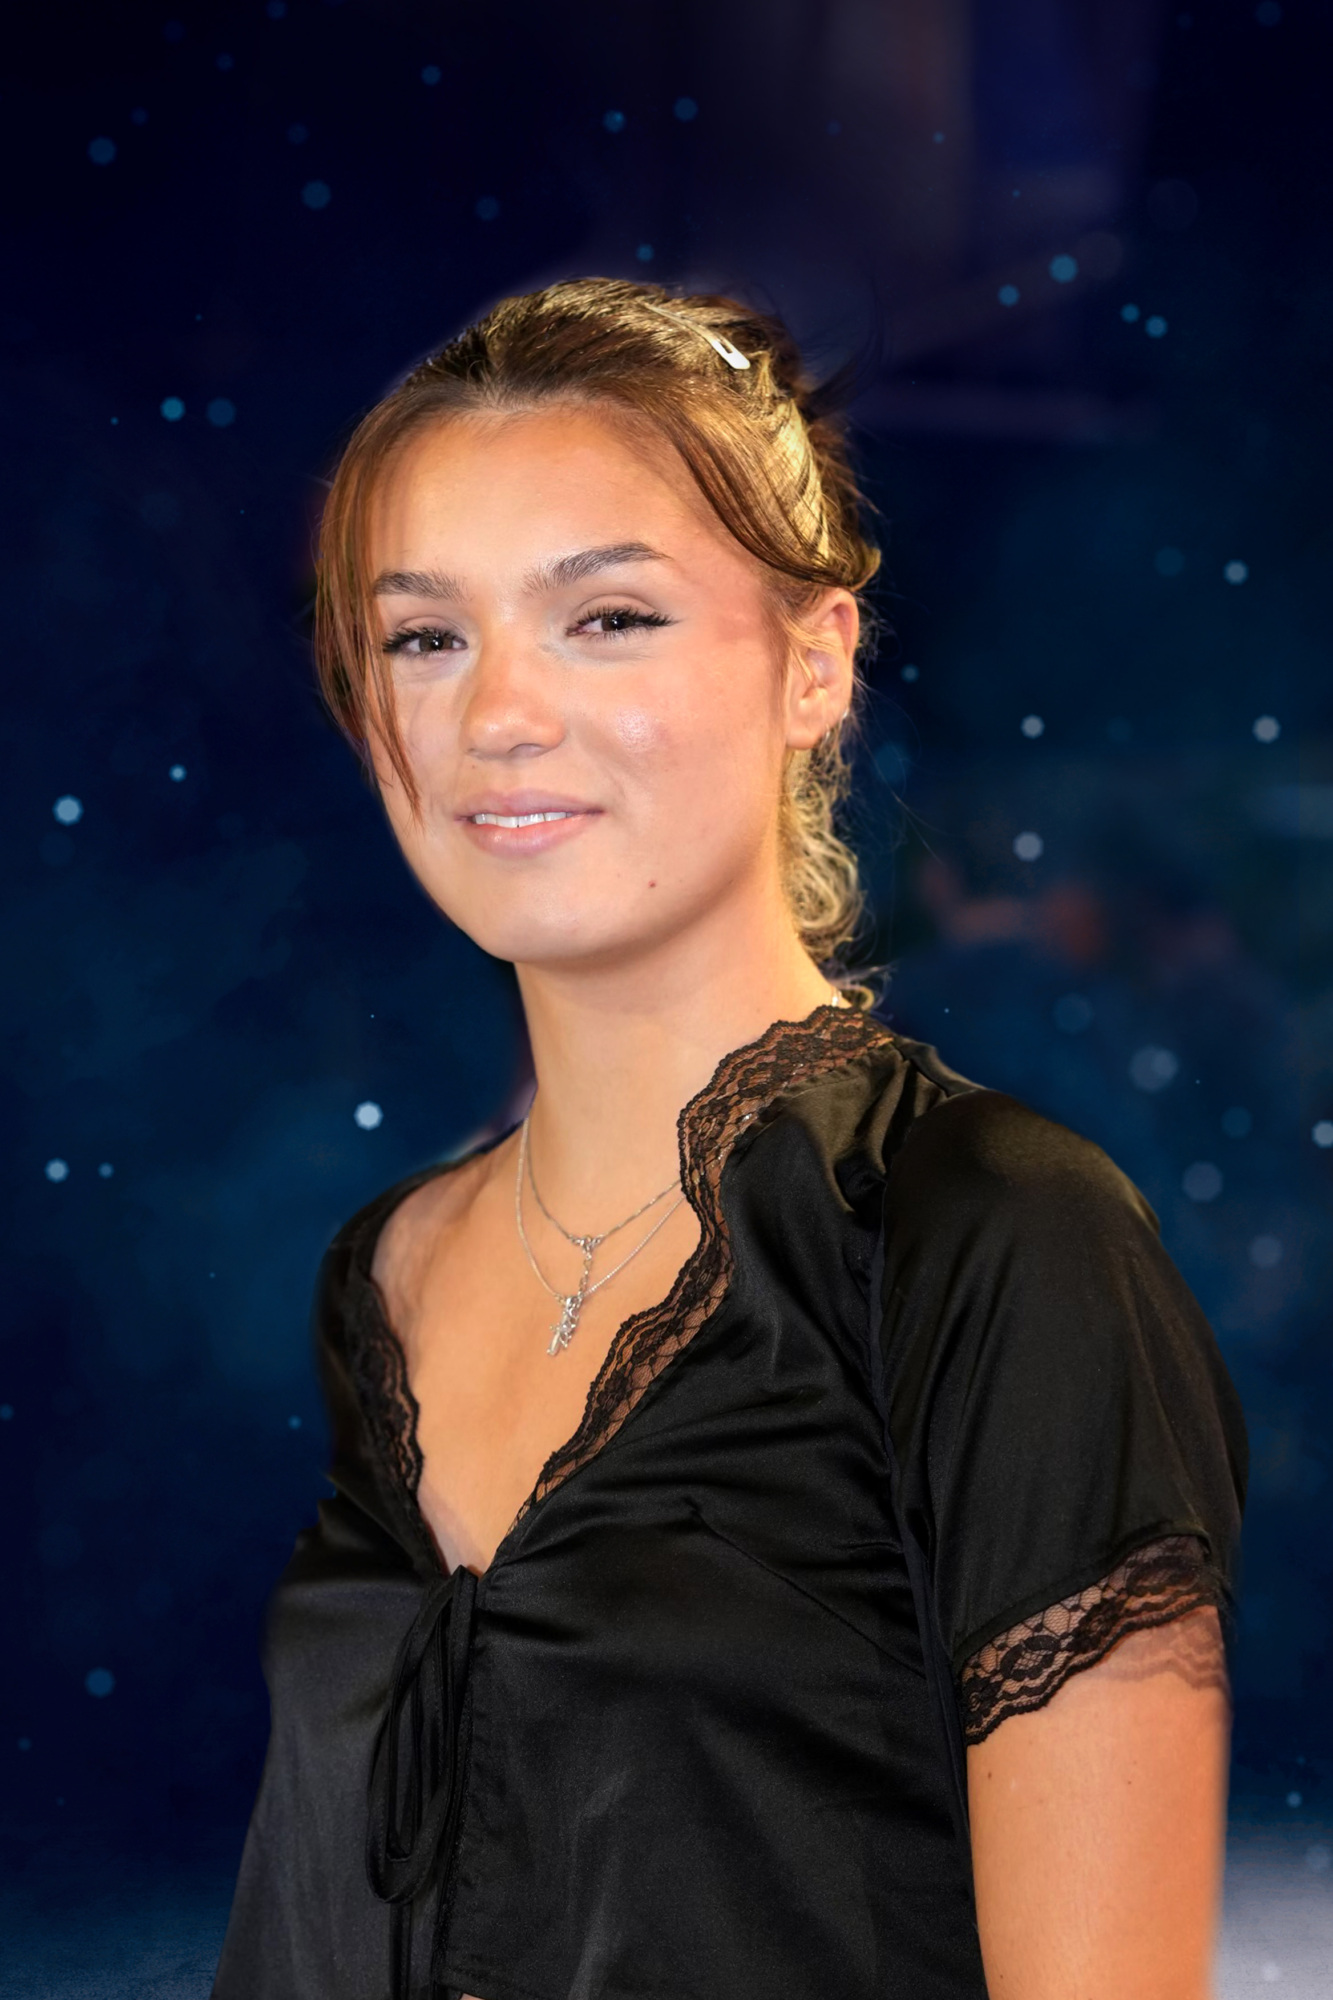 Young woman with a relaxed smile, wearing a black lace-trimmed blouse, with her hair pulled back. a blurred blue background with sparkles enhances the portrait.